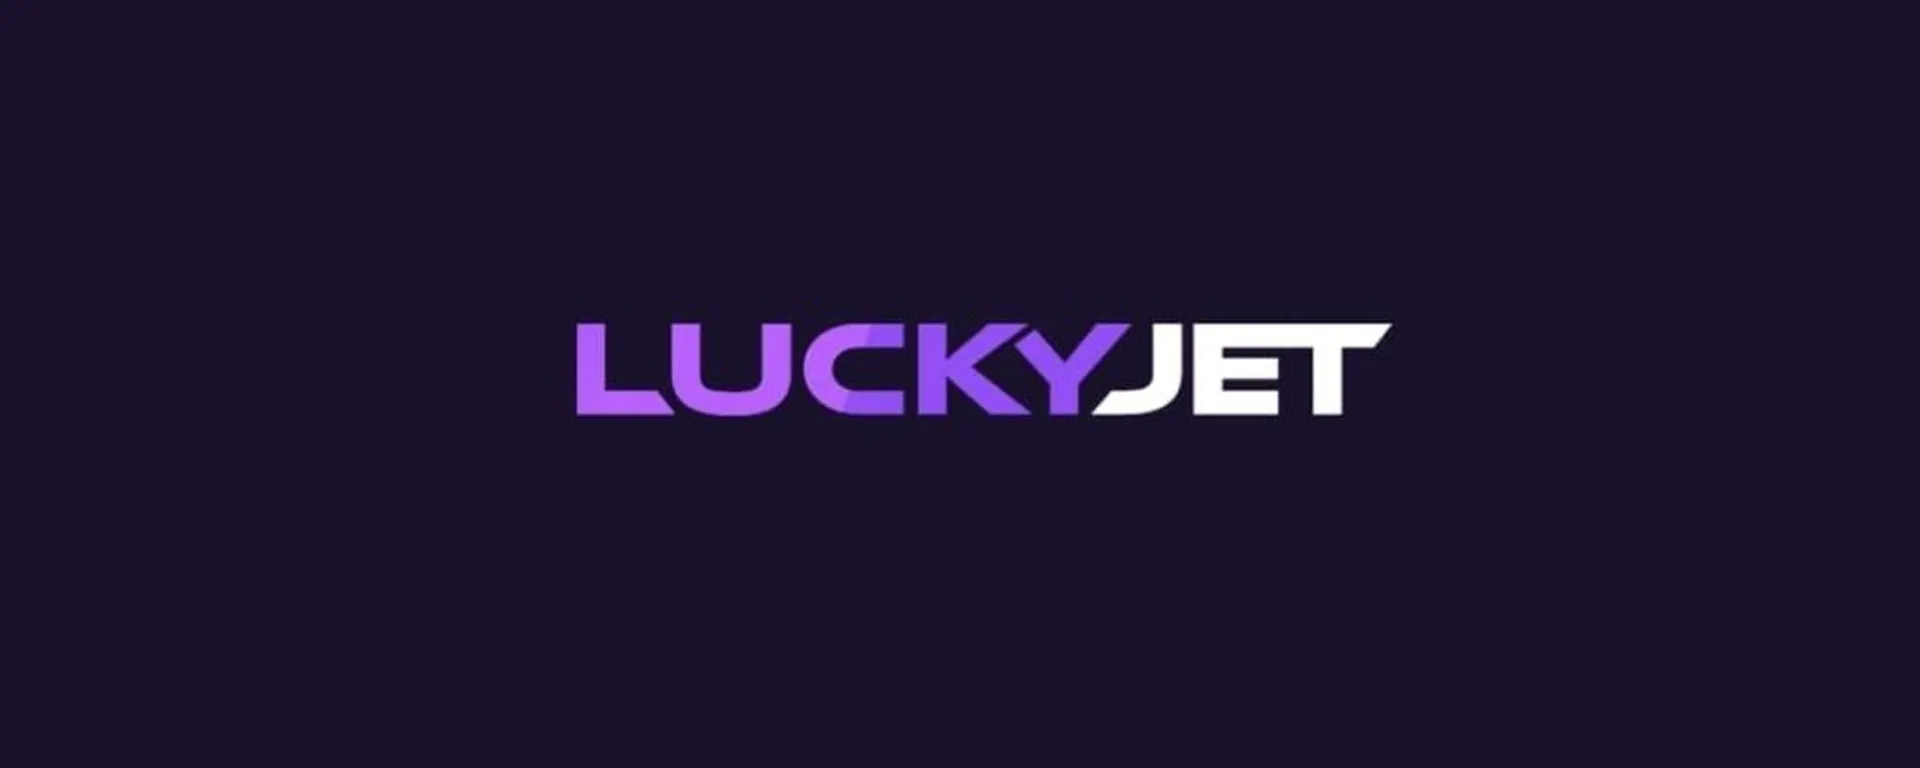 Lucky Jet juego